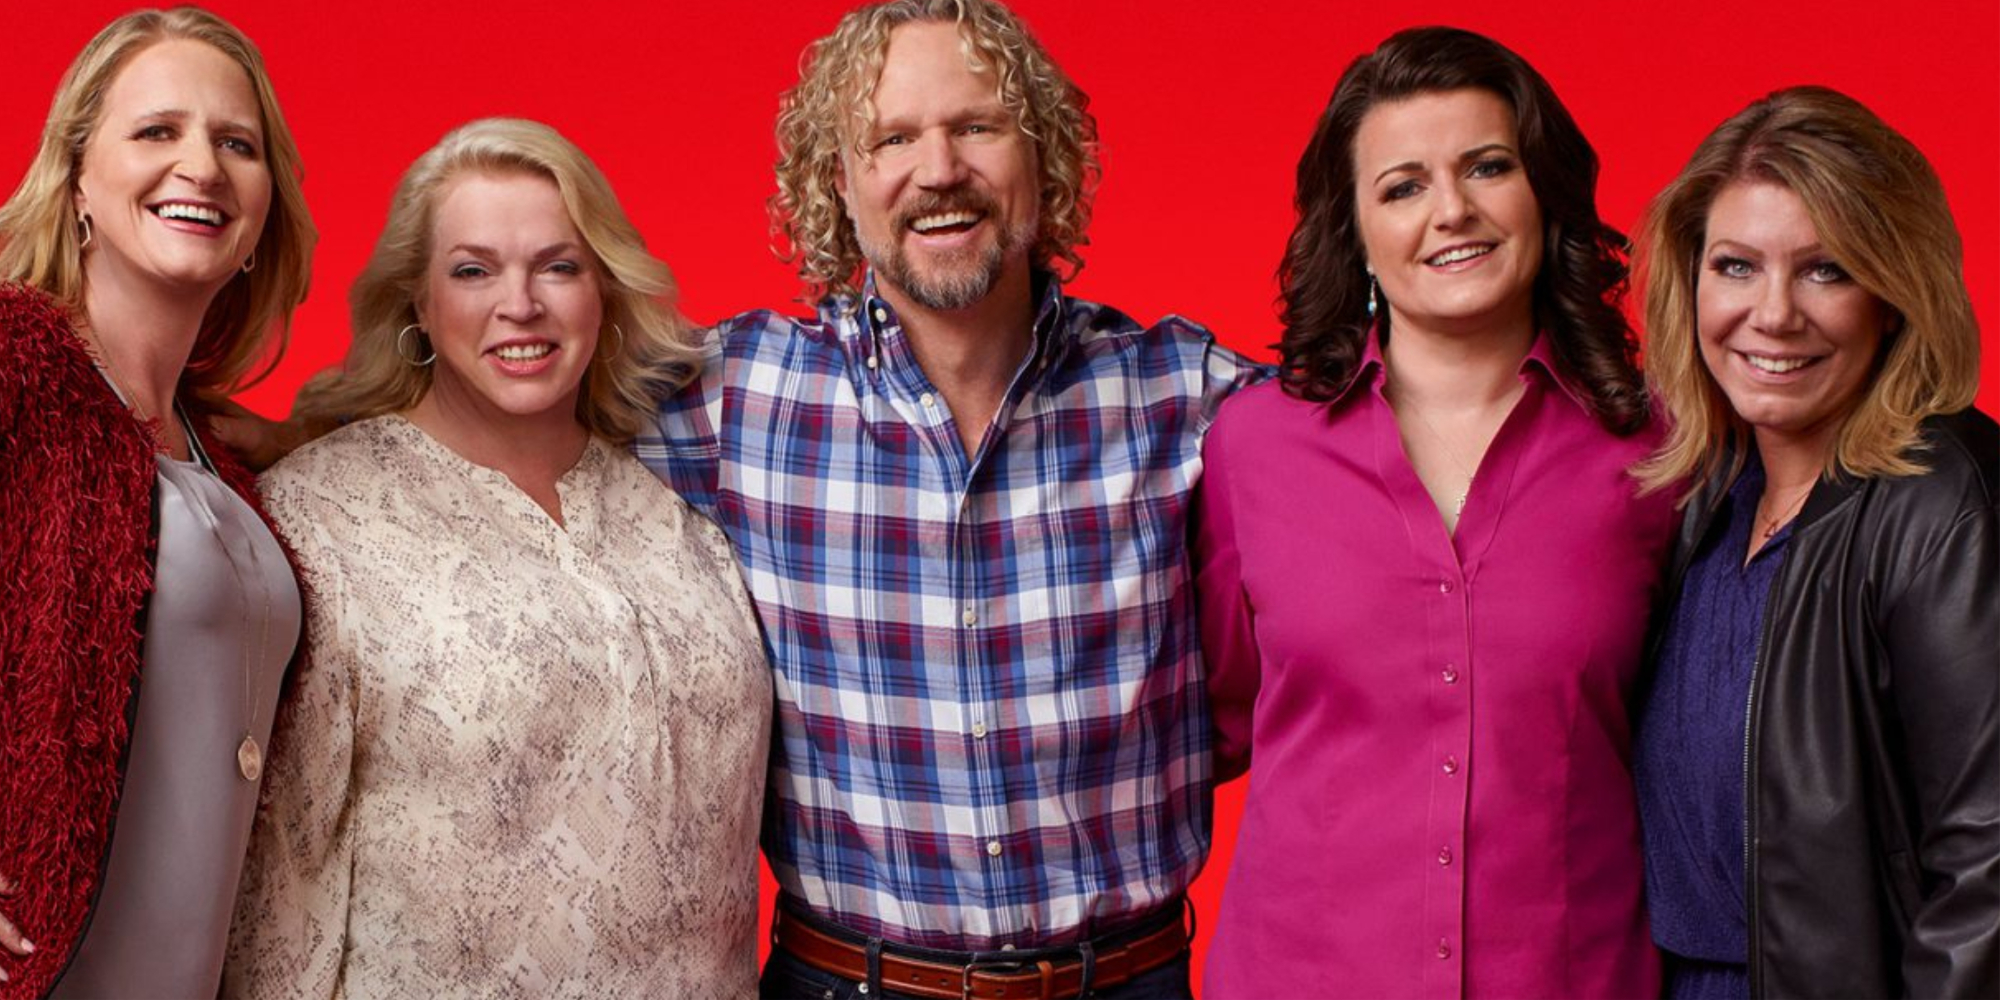 Season 17 ‘Sister Wives’ Trailer Hints at Trouble In Another of Kody Brown’s Marriages